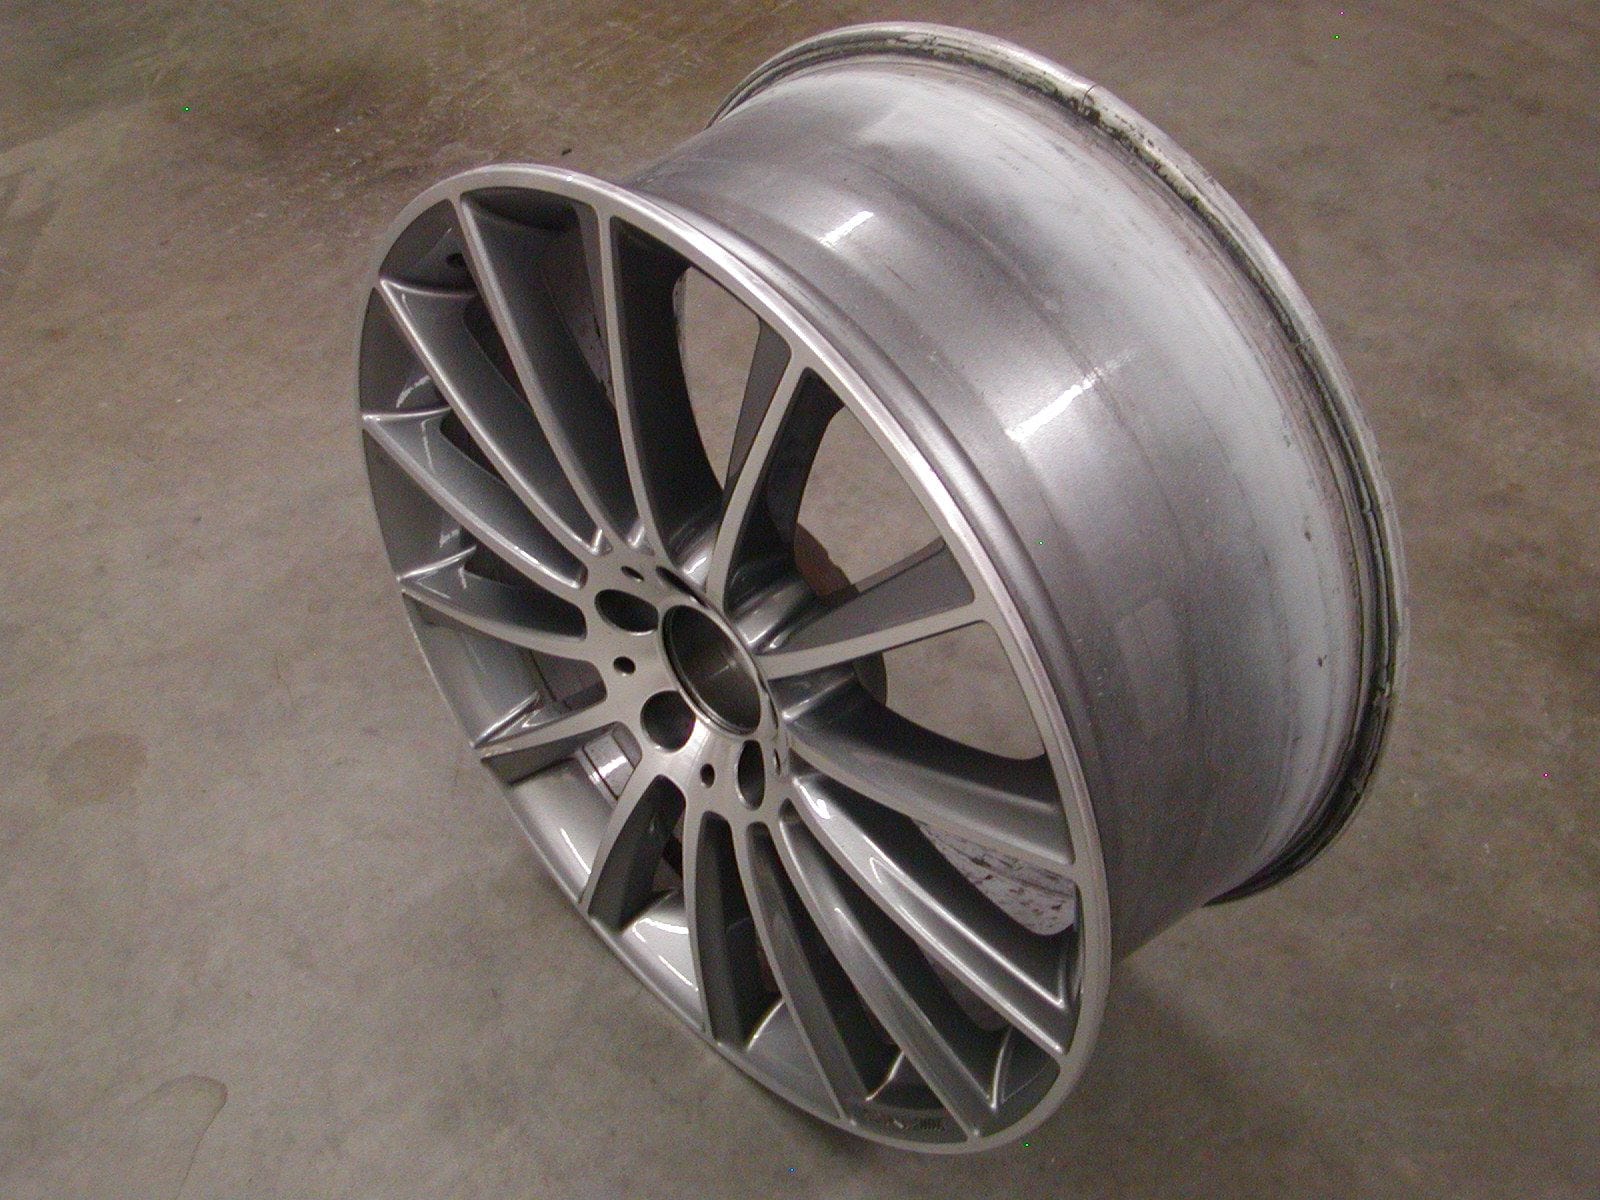 Wheels and Tires/Axles - Used Mercedes A2224010400 OEM AMG 20 x 8.5 WHEEL fits 2014 to 2019 S-Class - Used - 2014 to 2019 Mercedes-Benz S550 - Seattle, WA 98199, United States